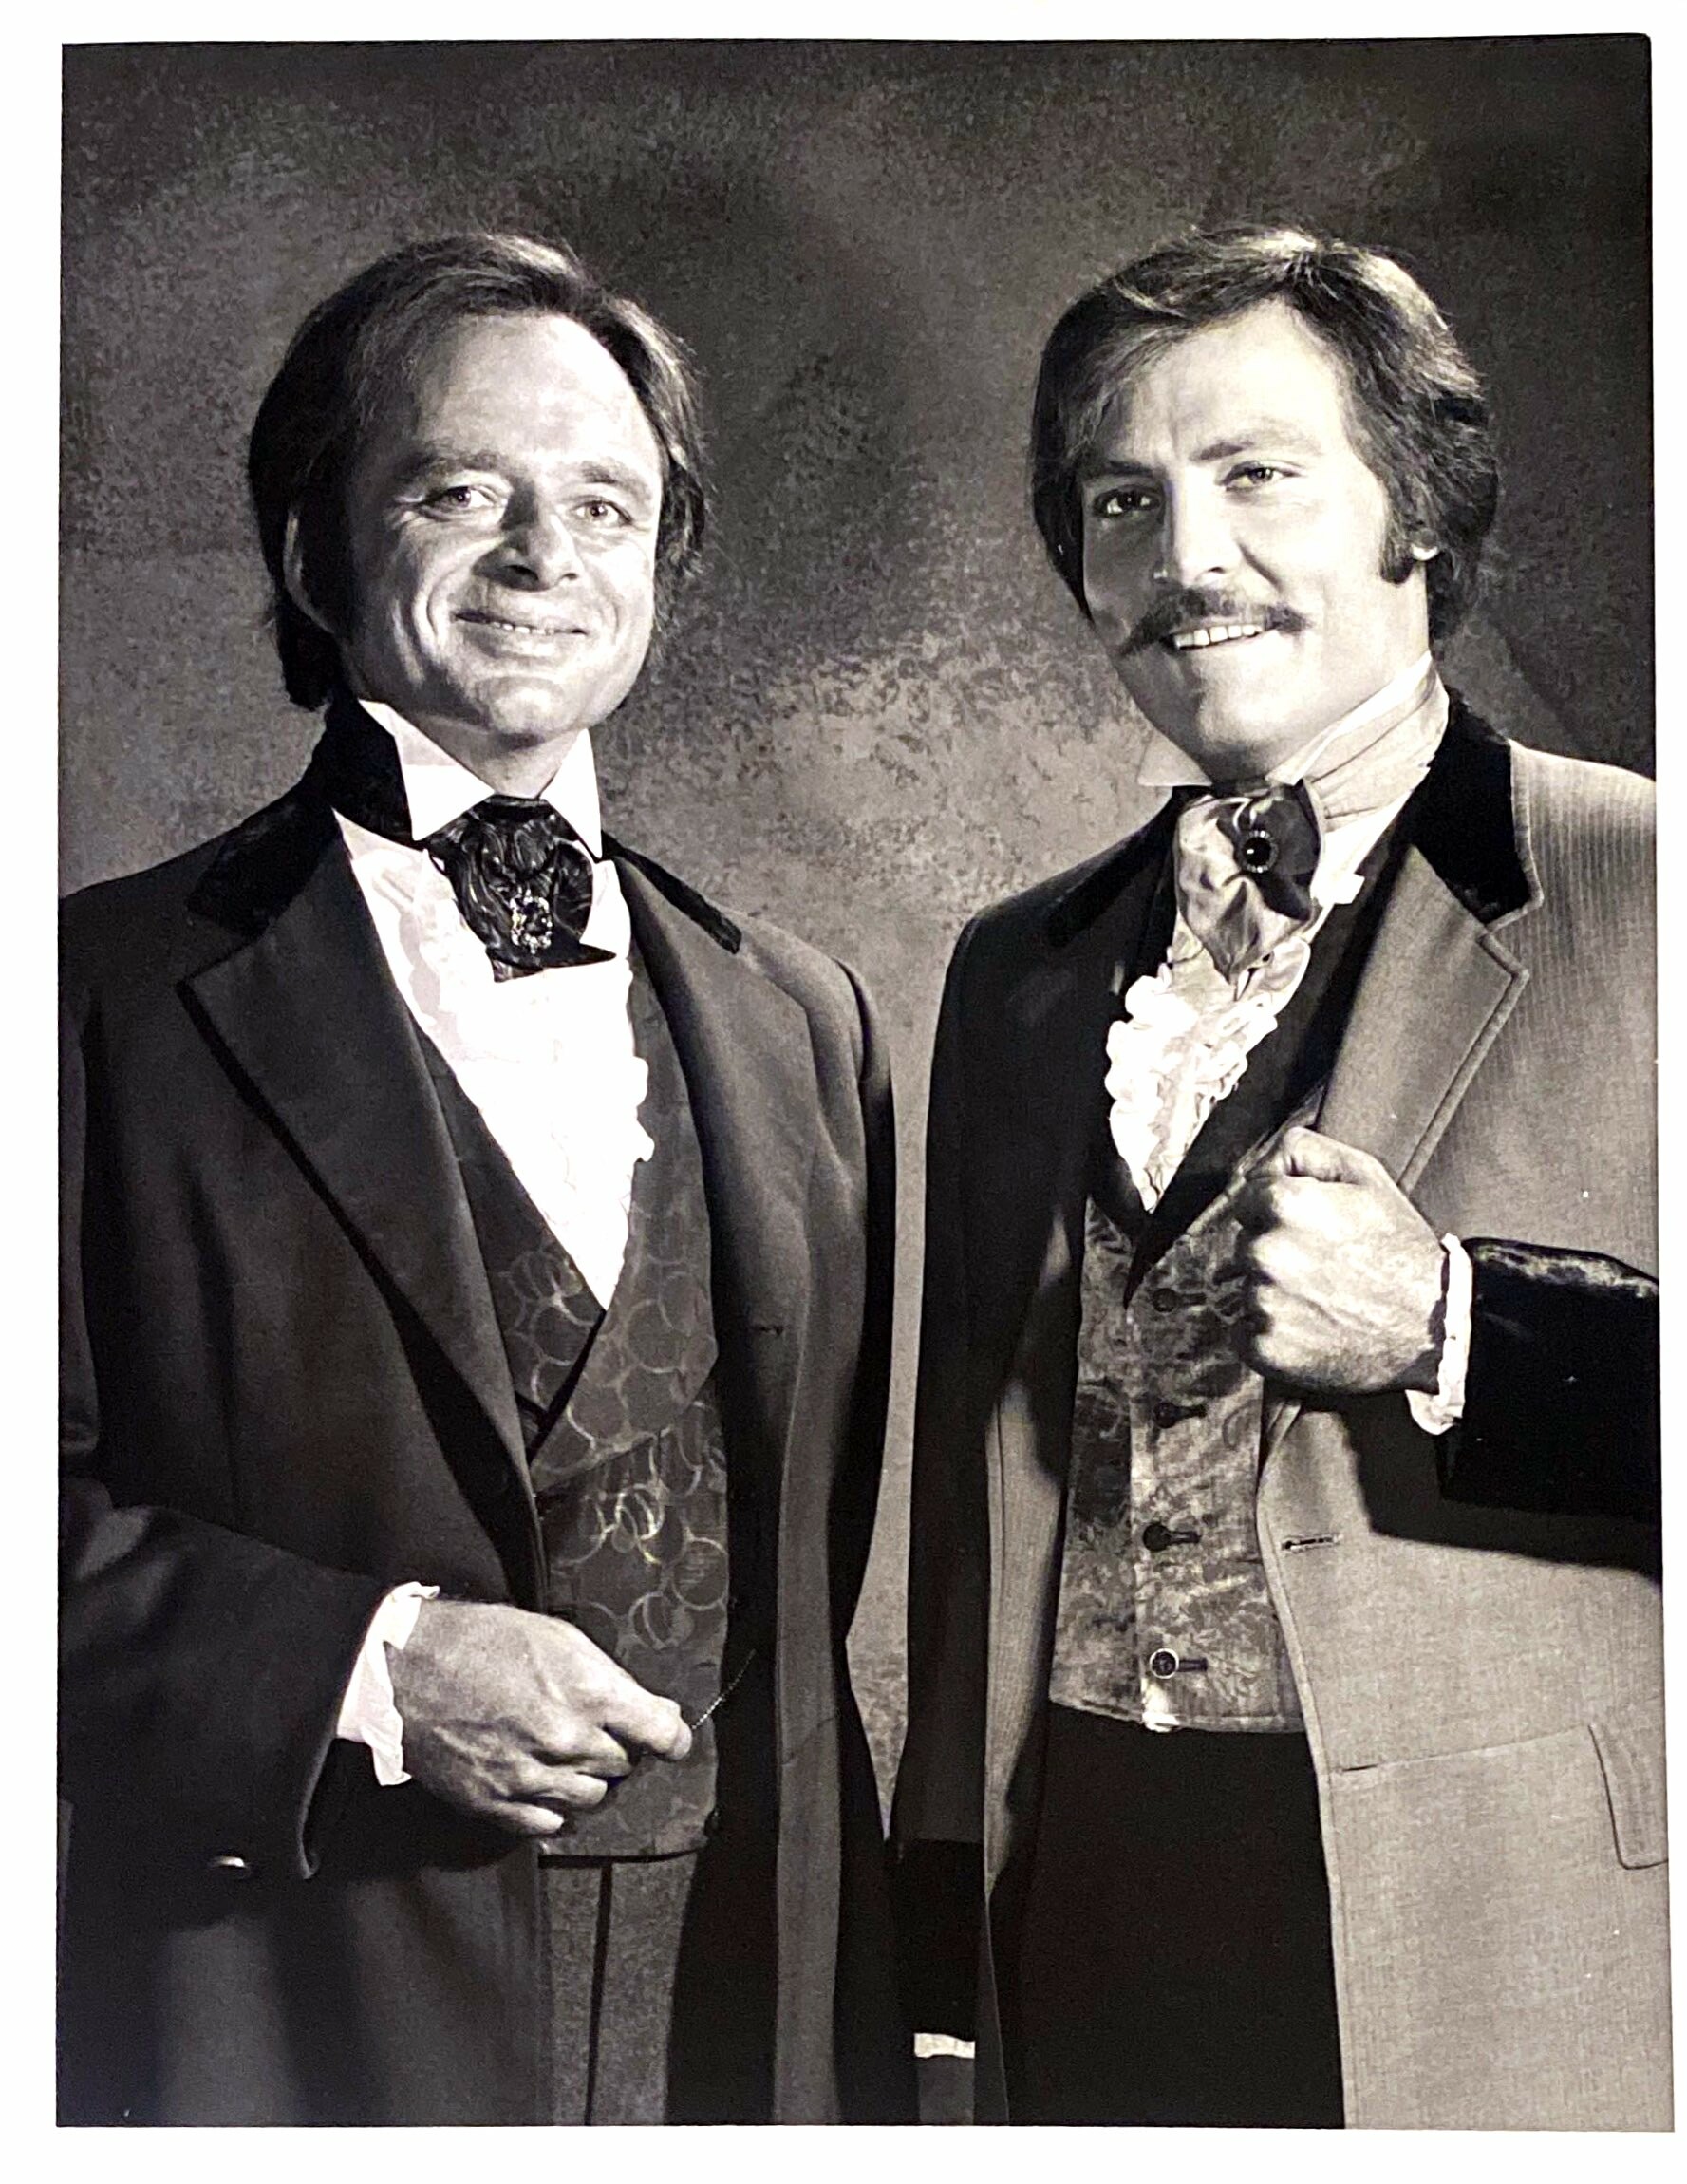 Harris Yulin and Stacy Keach starred as the Blackwood brothers in the 1976 television film 